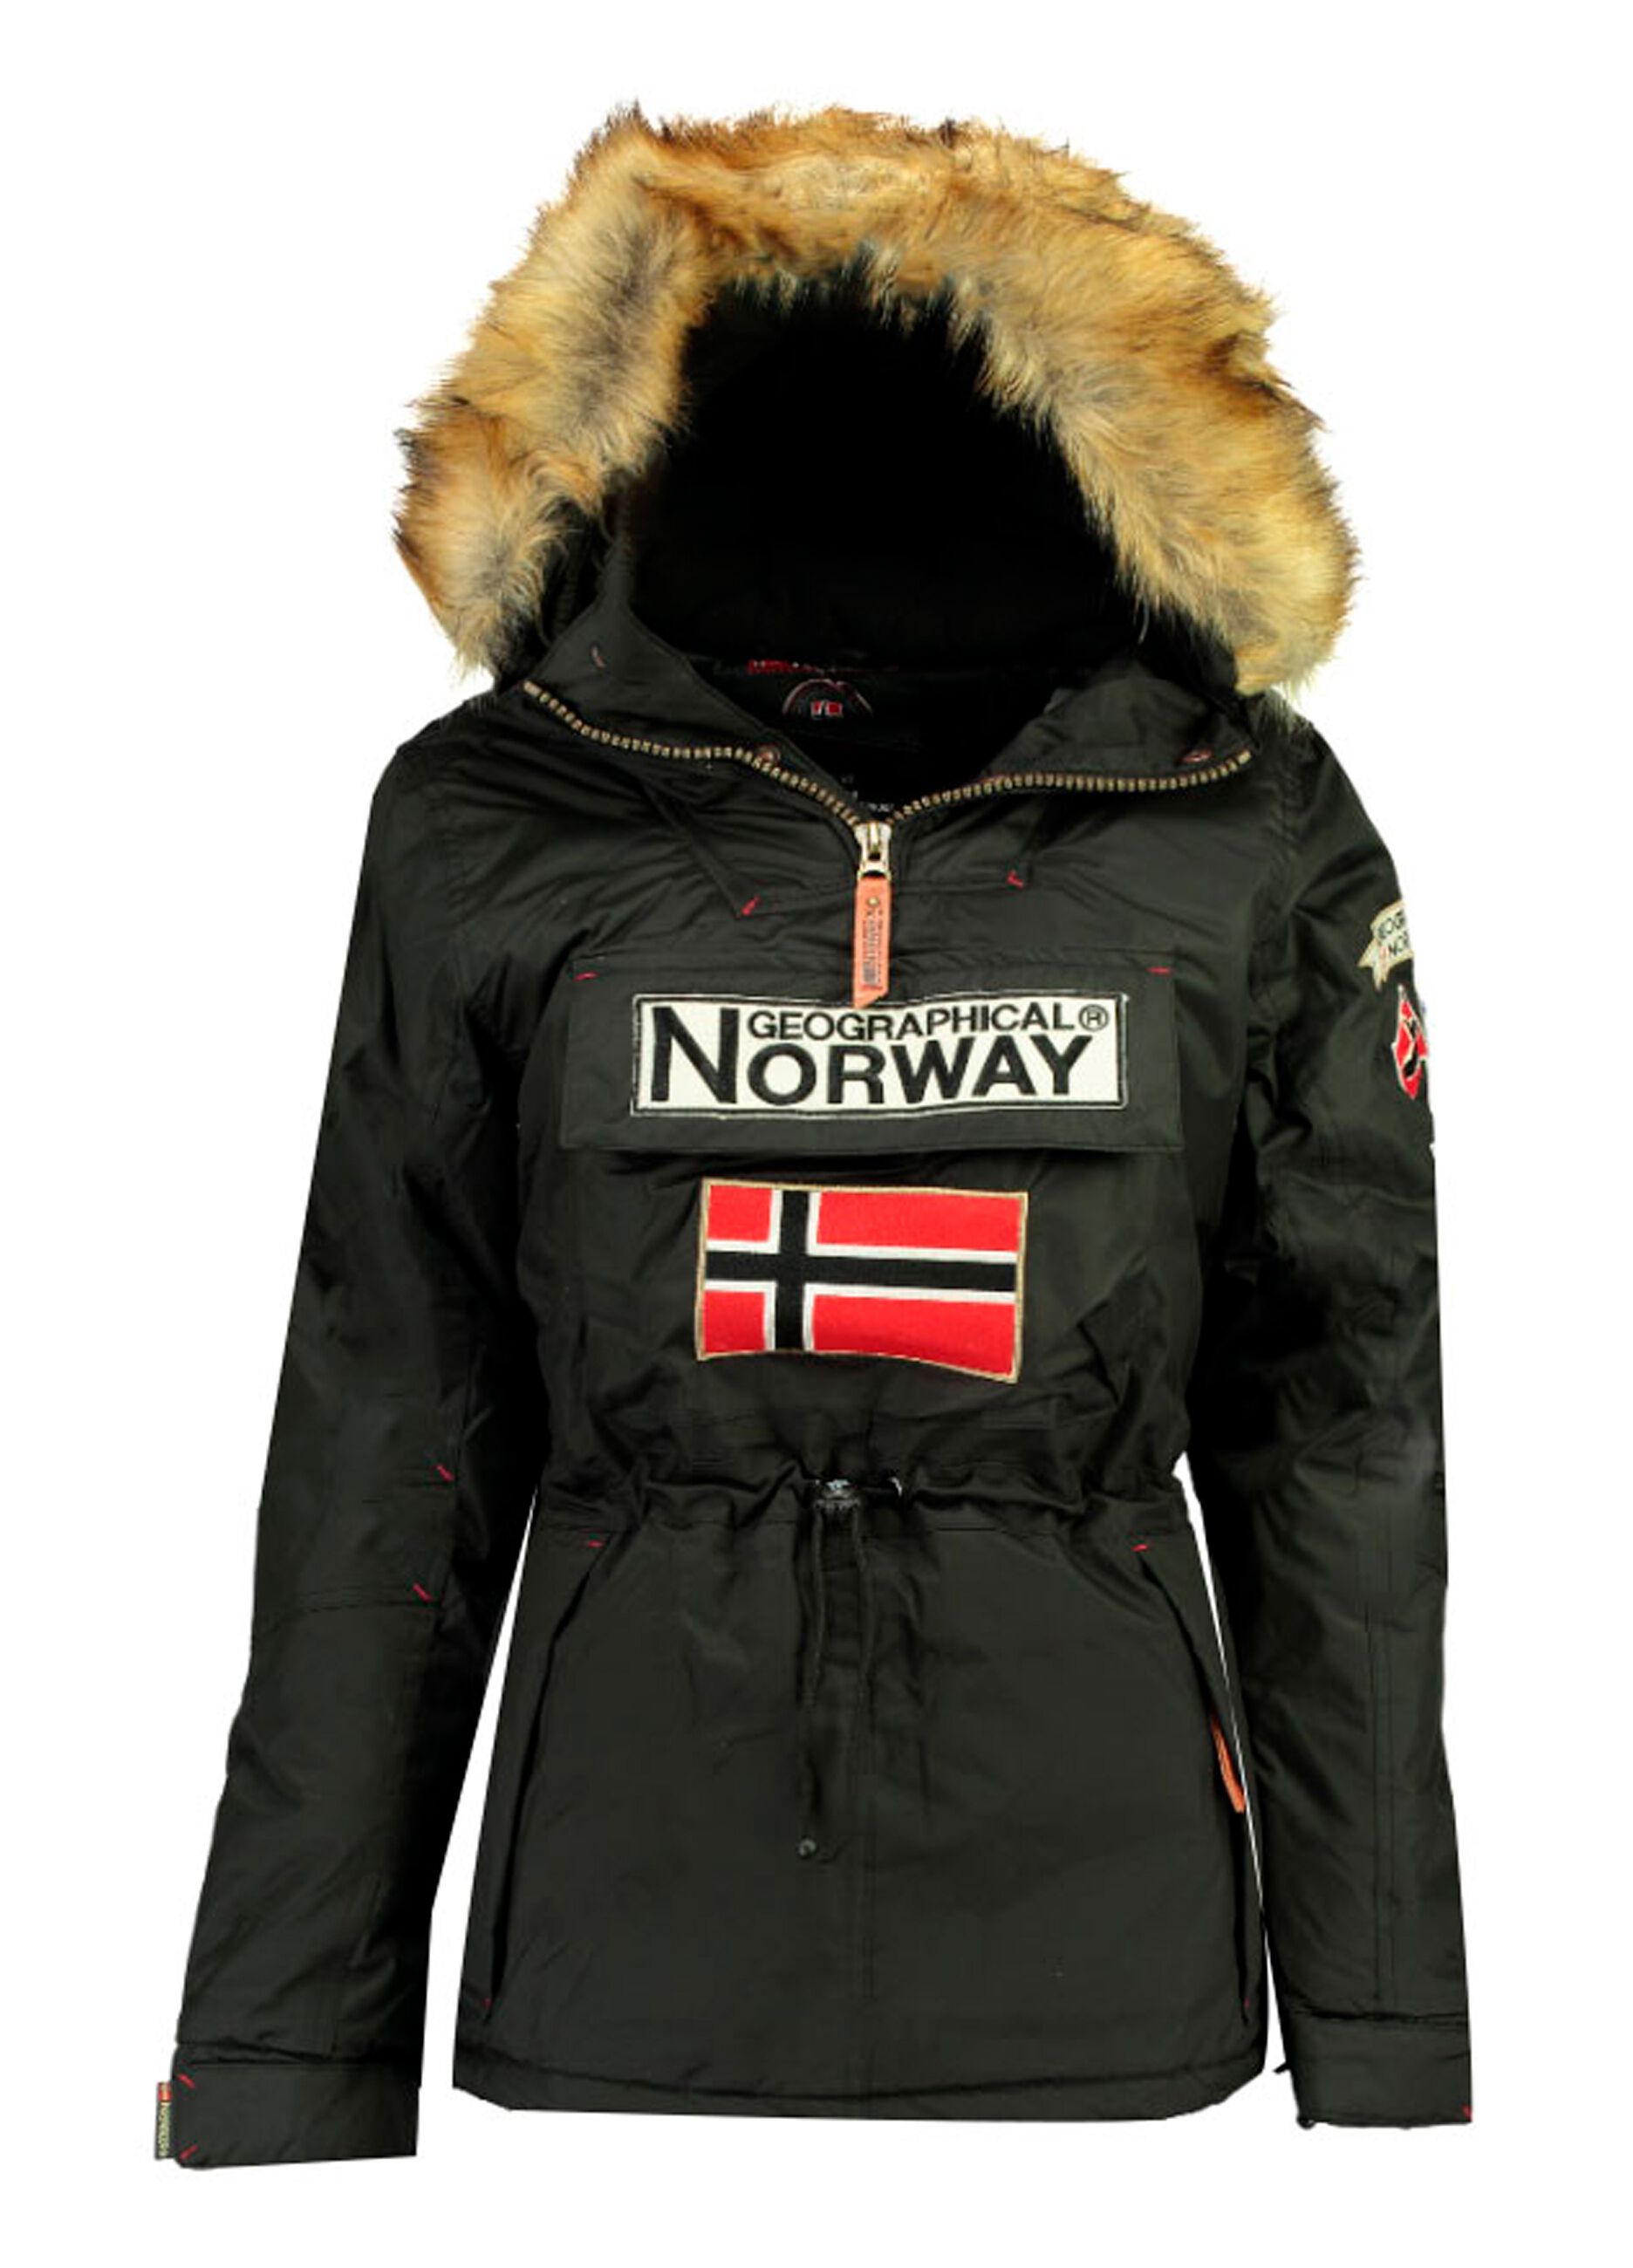 Geographical Norway padded parka with hood